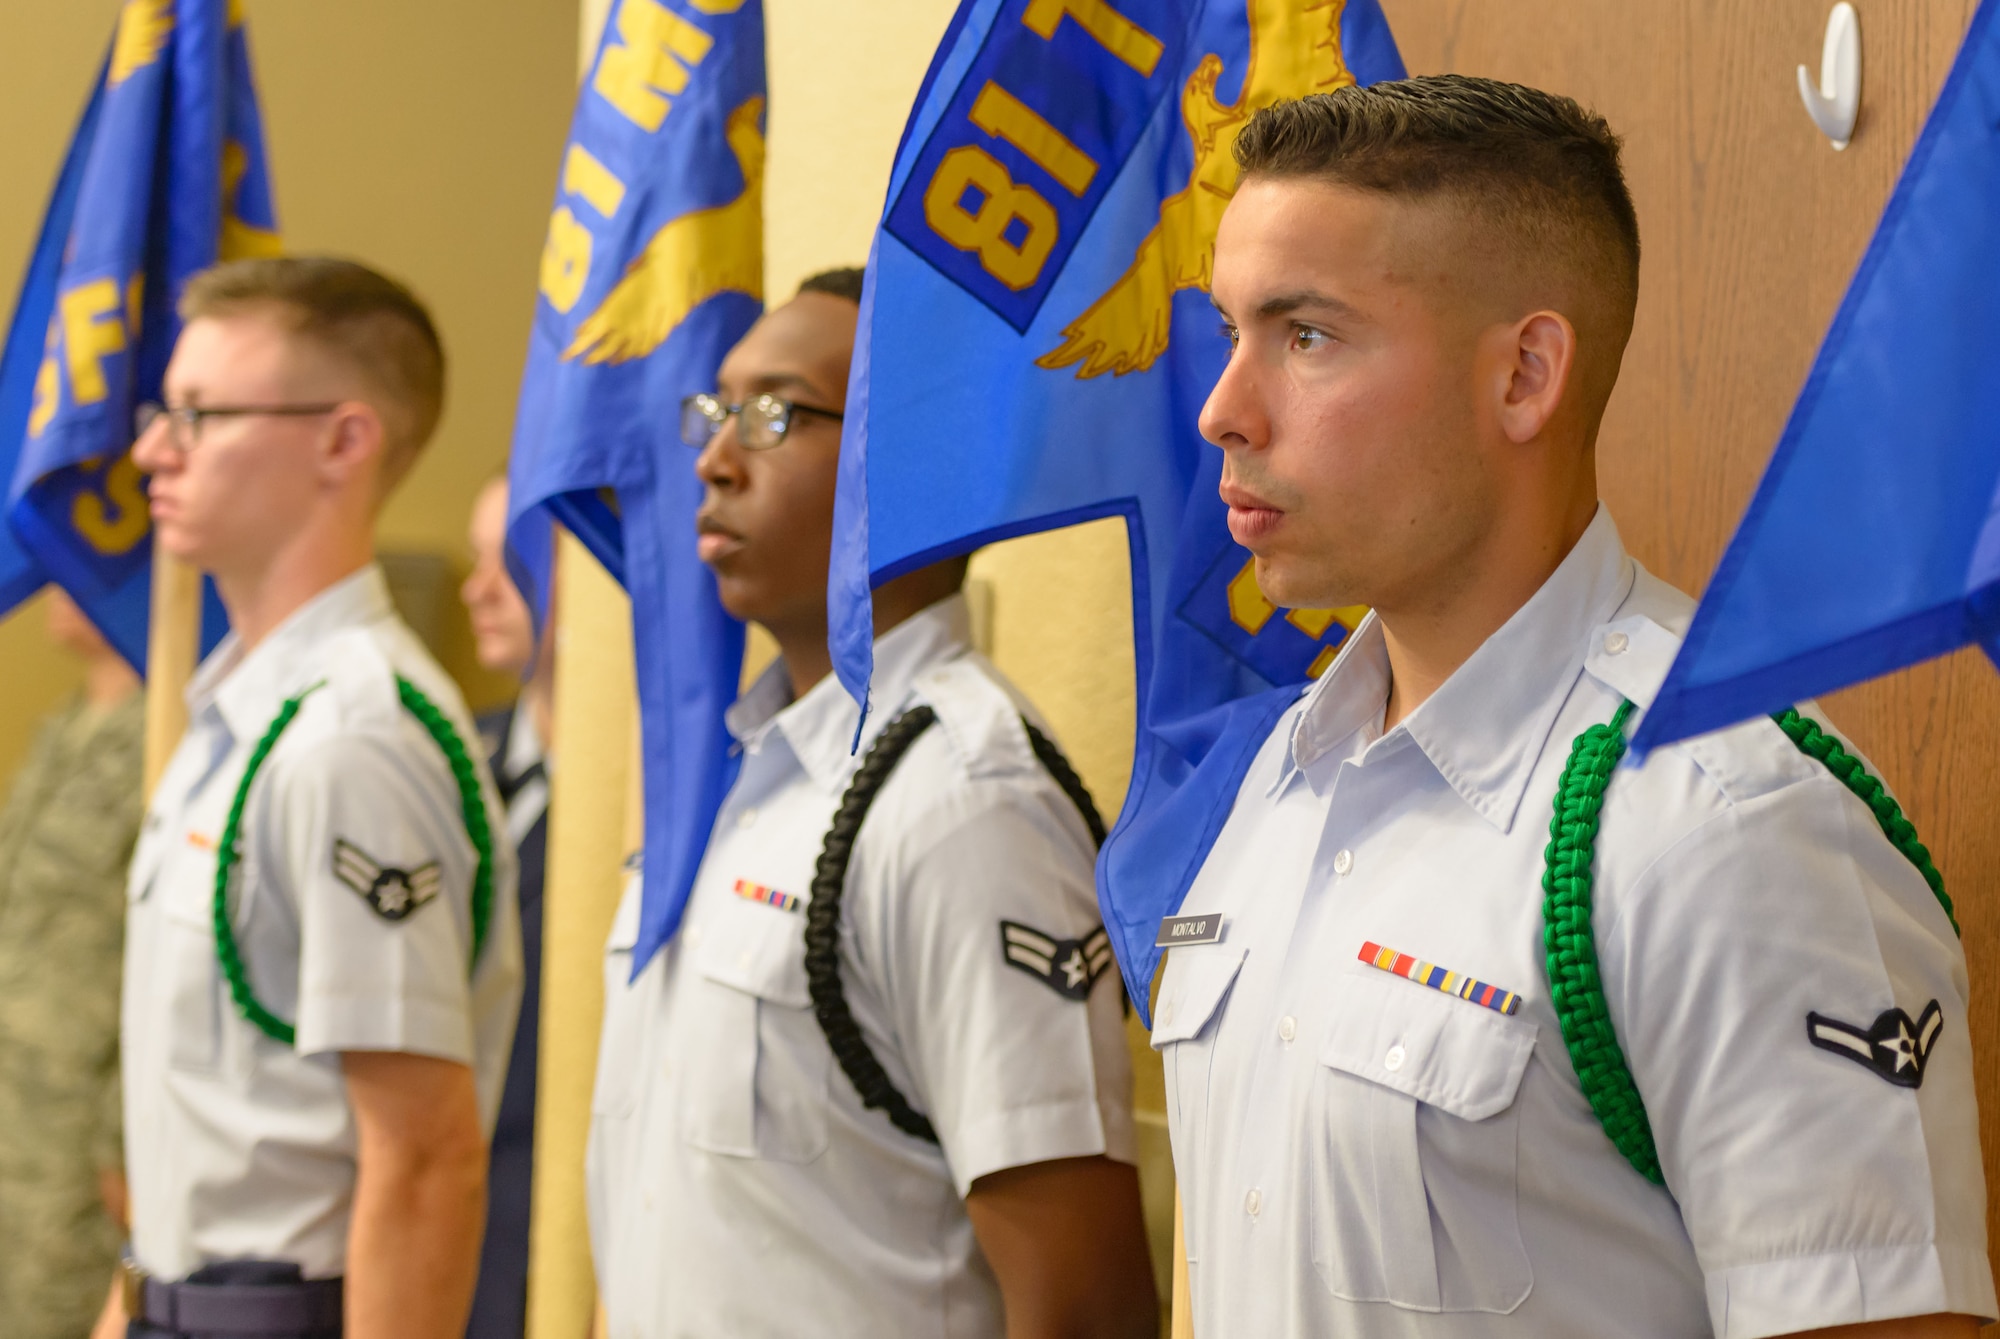 Airmen from the 81st Training Group hold Keesler squadron guidons during the 81st Training Wing change of command ceremony at the Bay Breeze Event Center June 2, 2017, on Keesler Air Force Base, Miss. The ceremony is a symbol of command being exchanged from one commander to the next by the handing-off of a ceremonial guidon. (U.S. Air Force photo by André Askew)